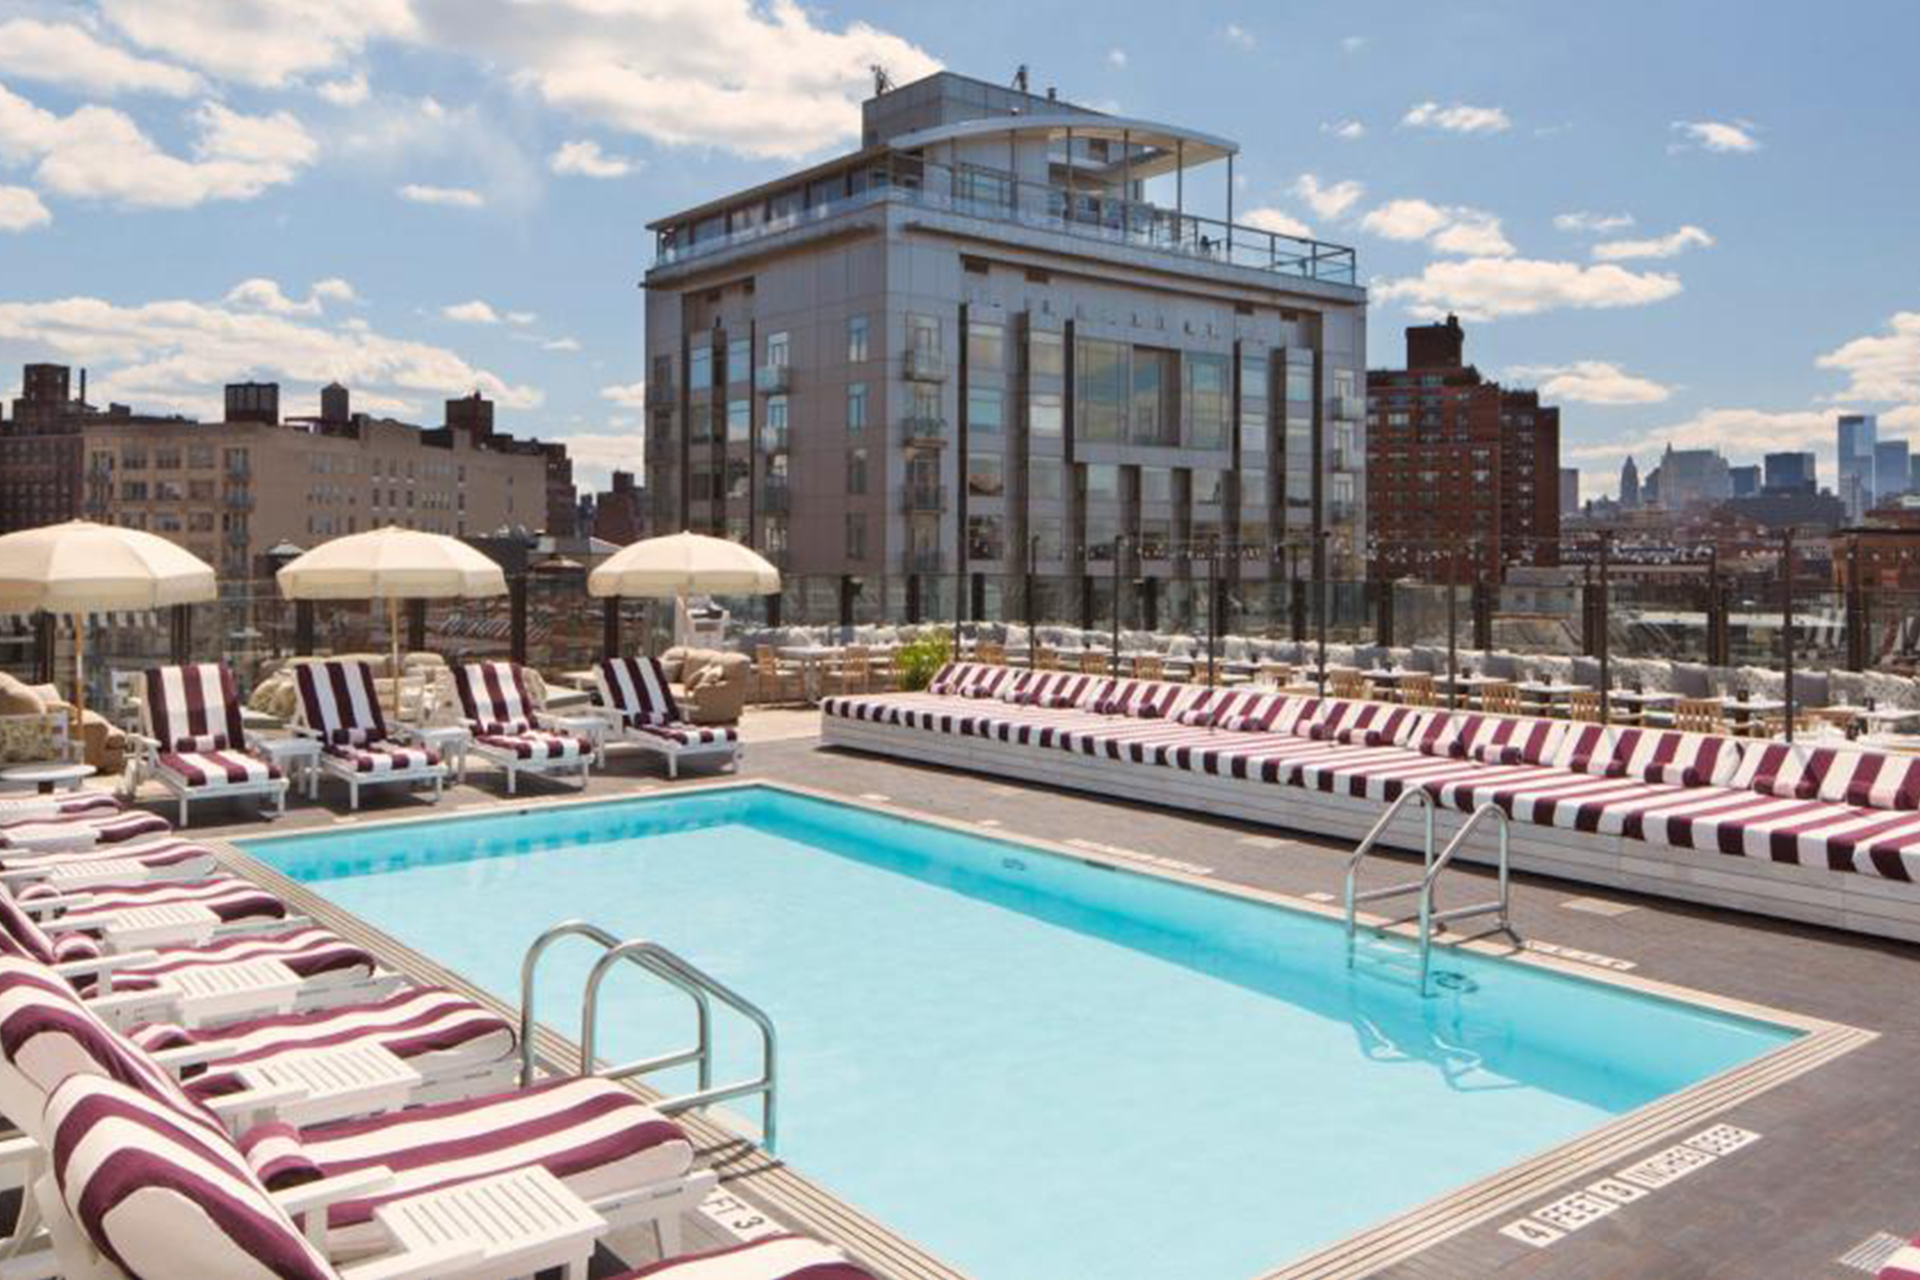 Do big-brand developments sell faster? | Empty roof pool